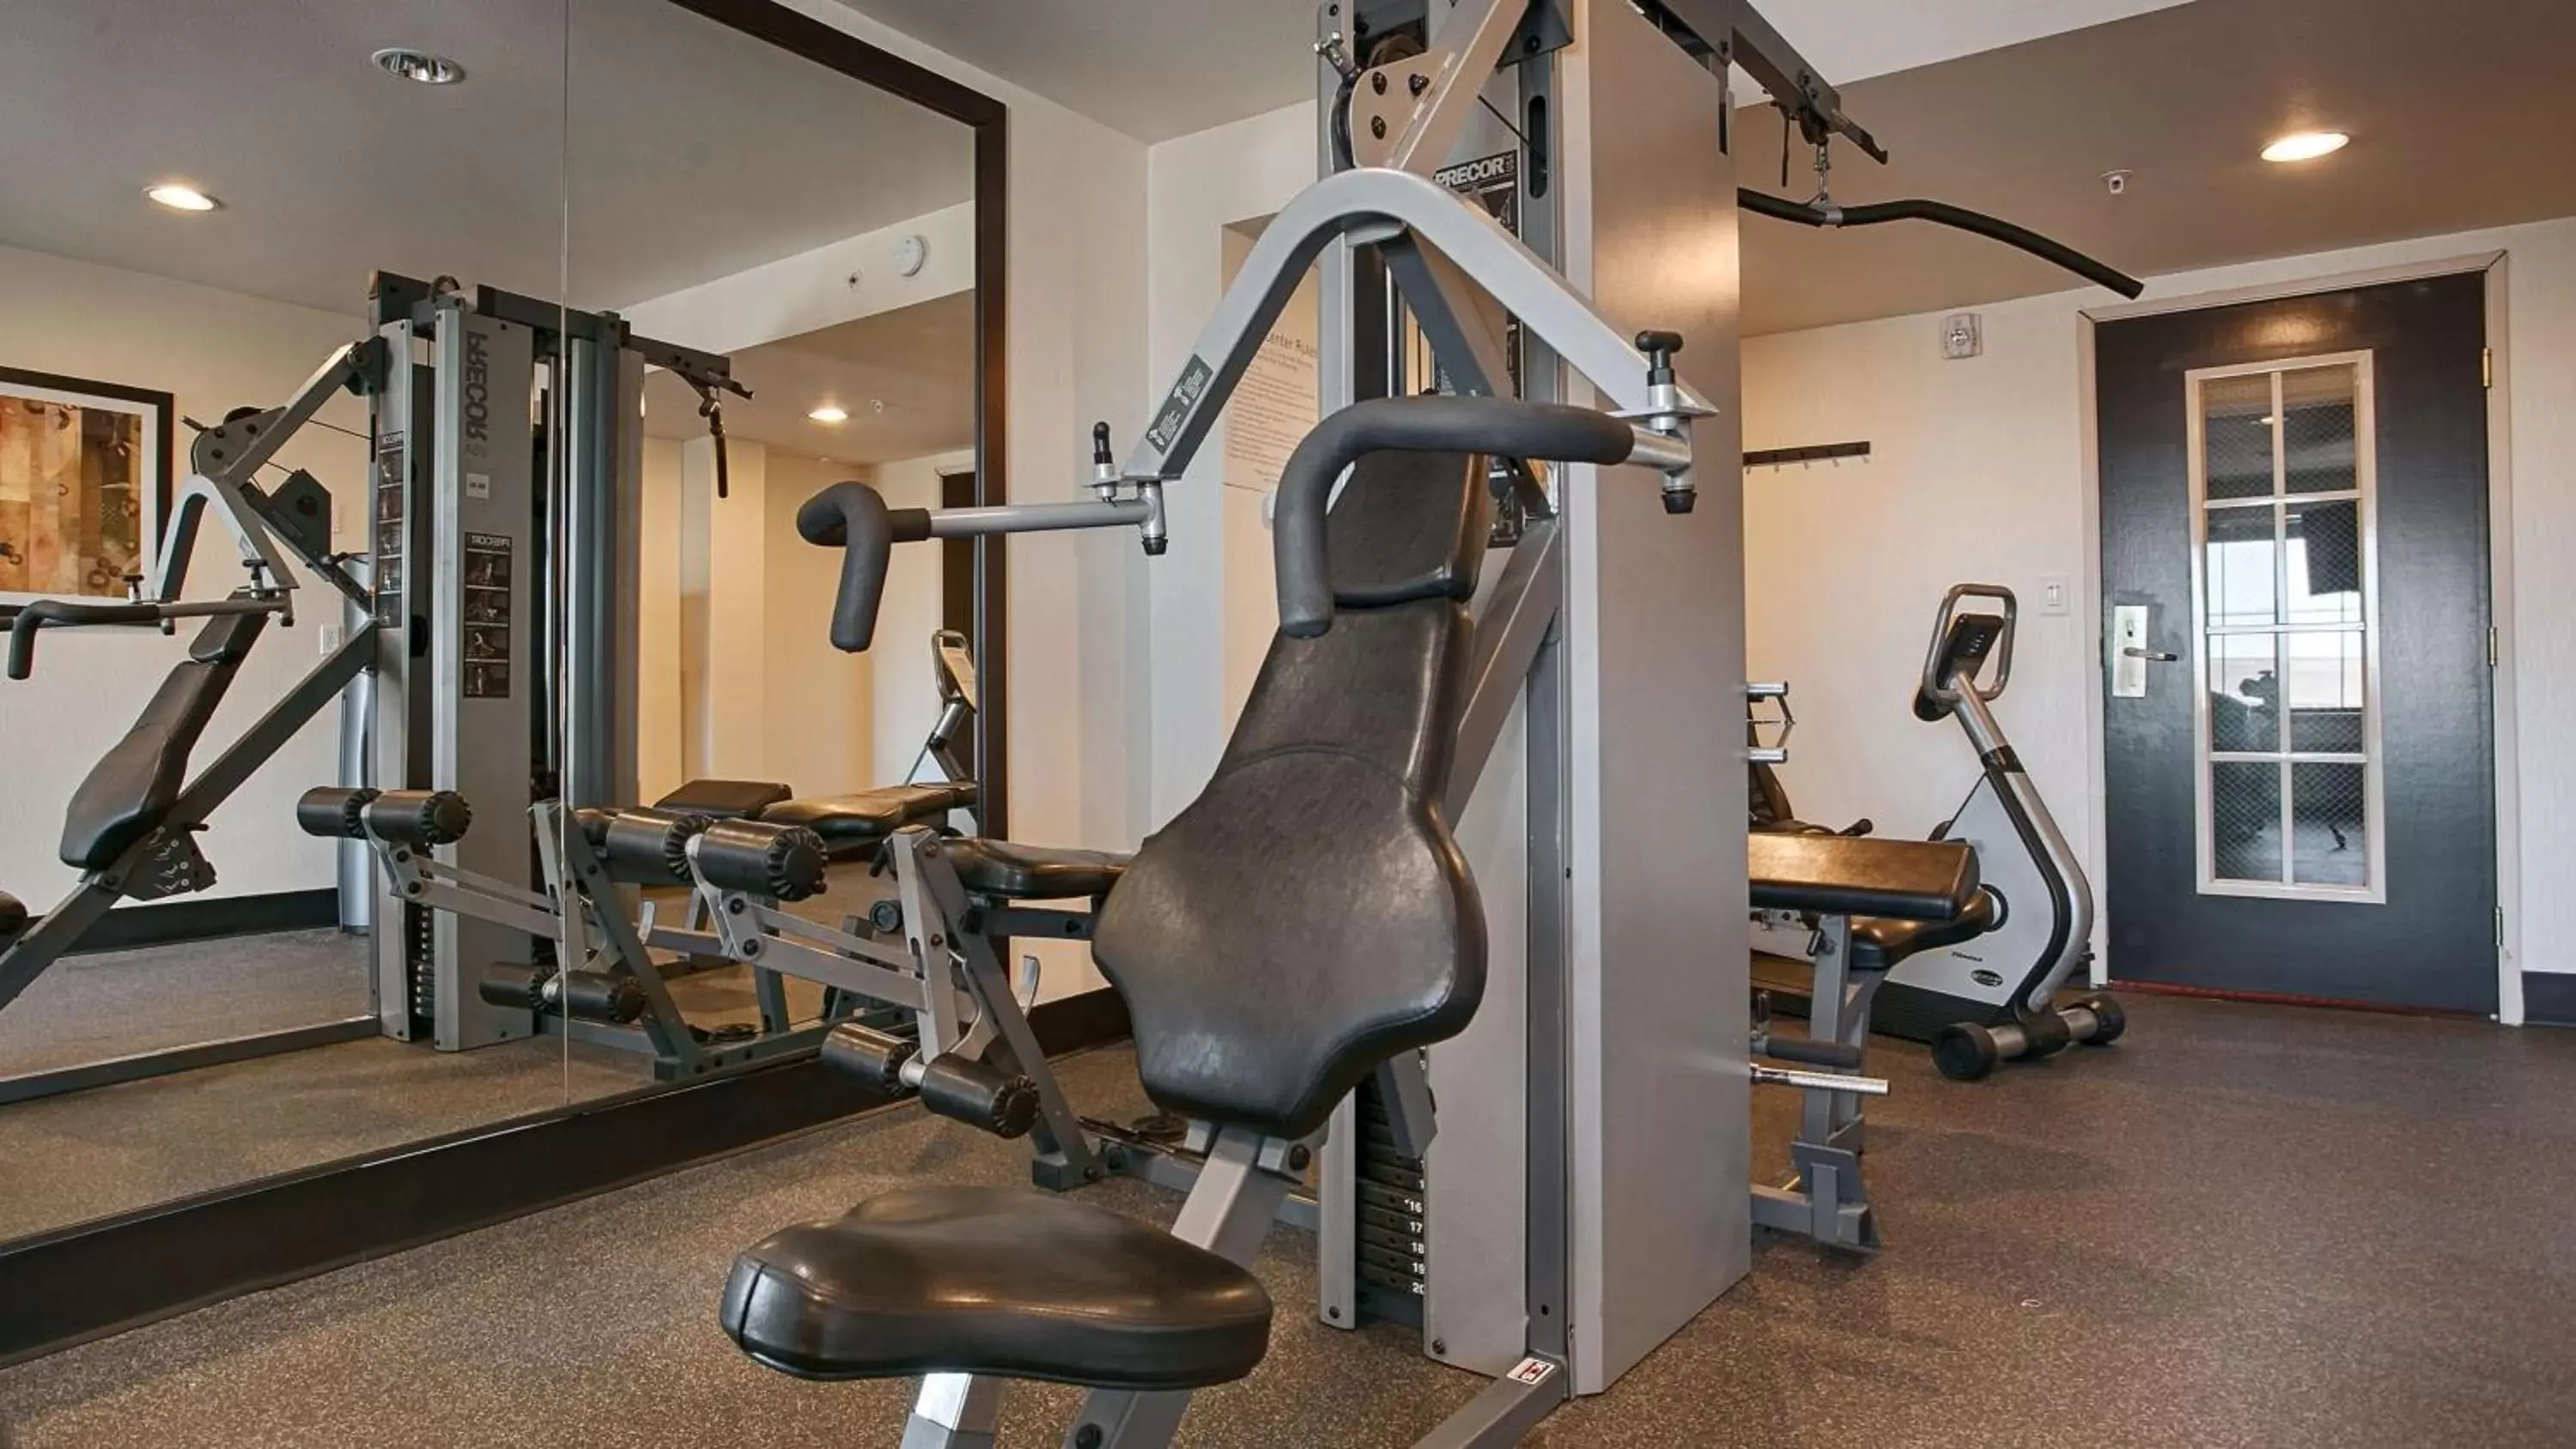 Fitness centre/facilities in High Plains Hotel at Denver International Airport